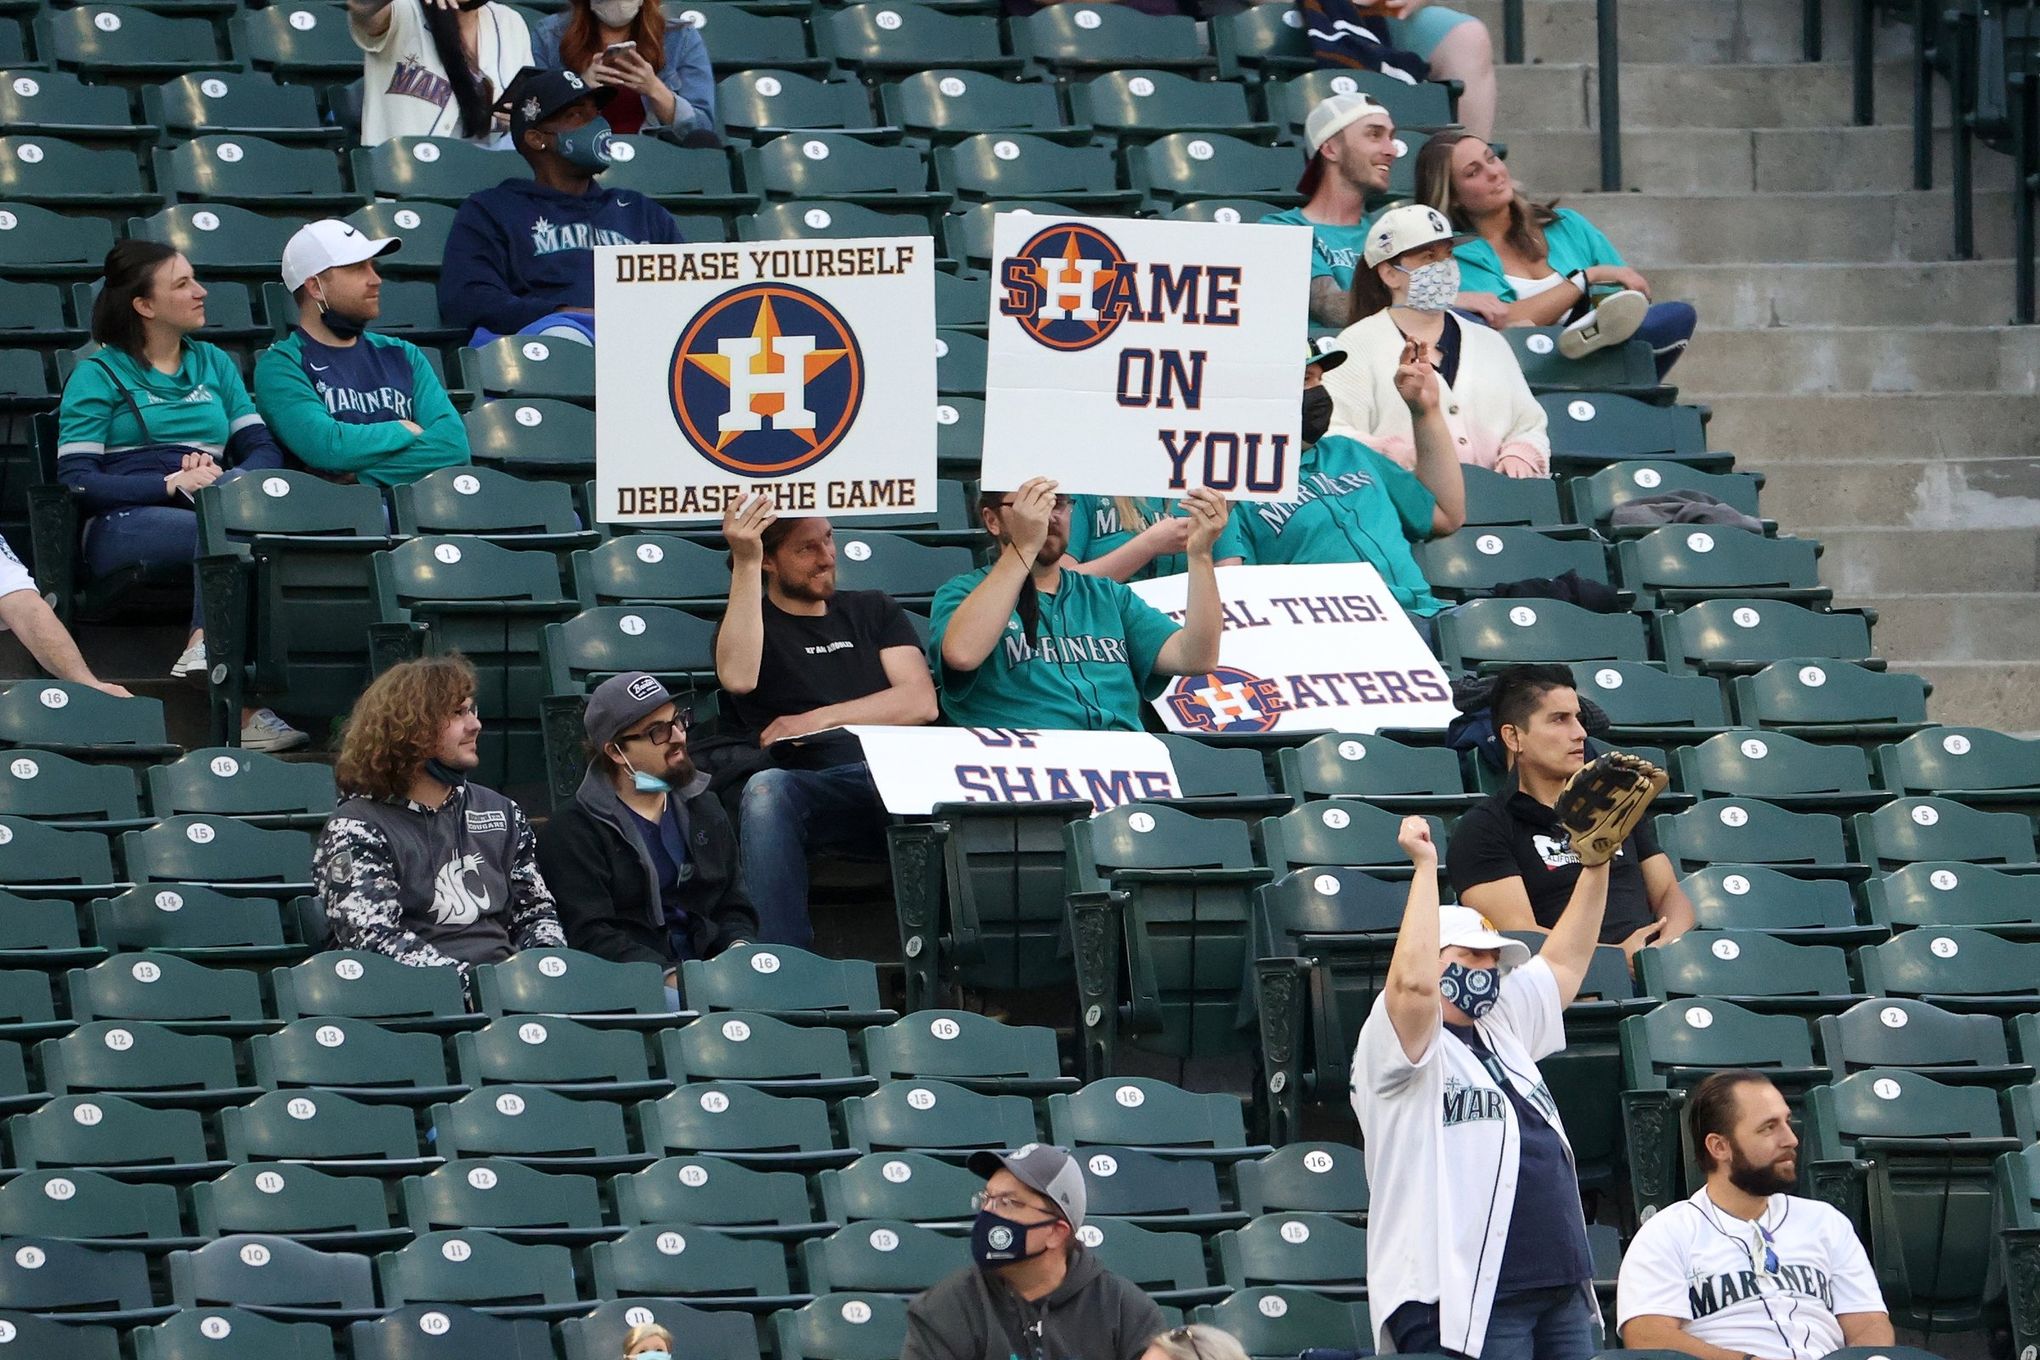 Why do so many baseball fans hate the Astros?